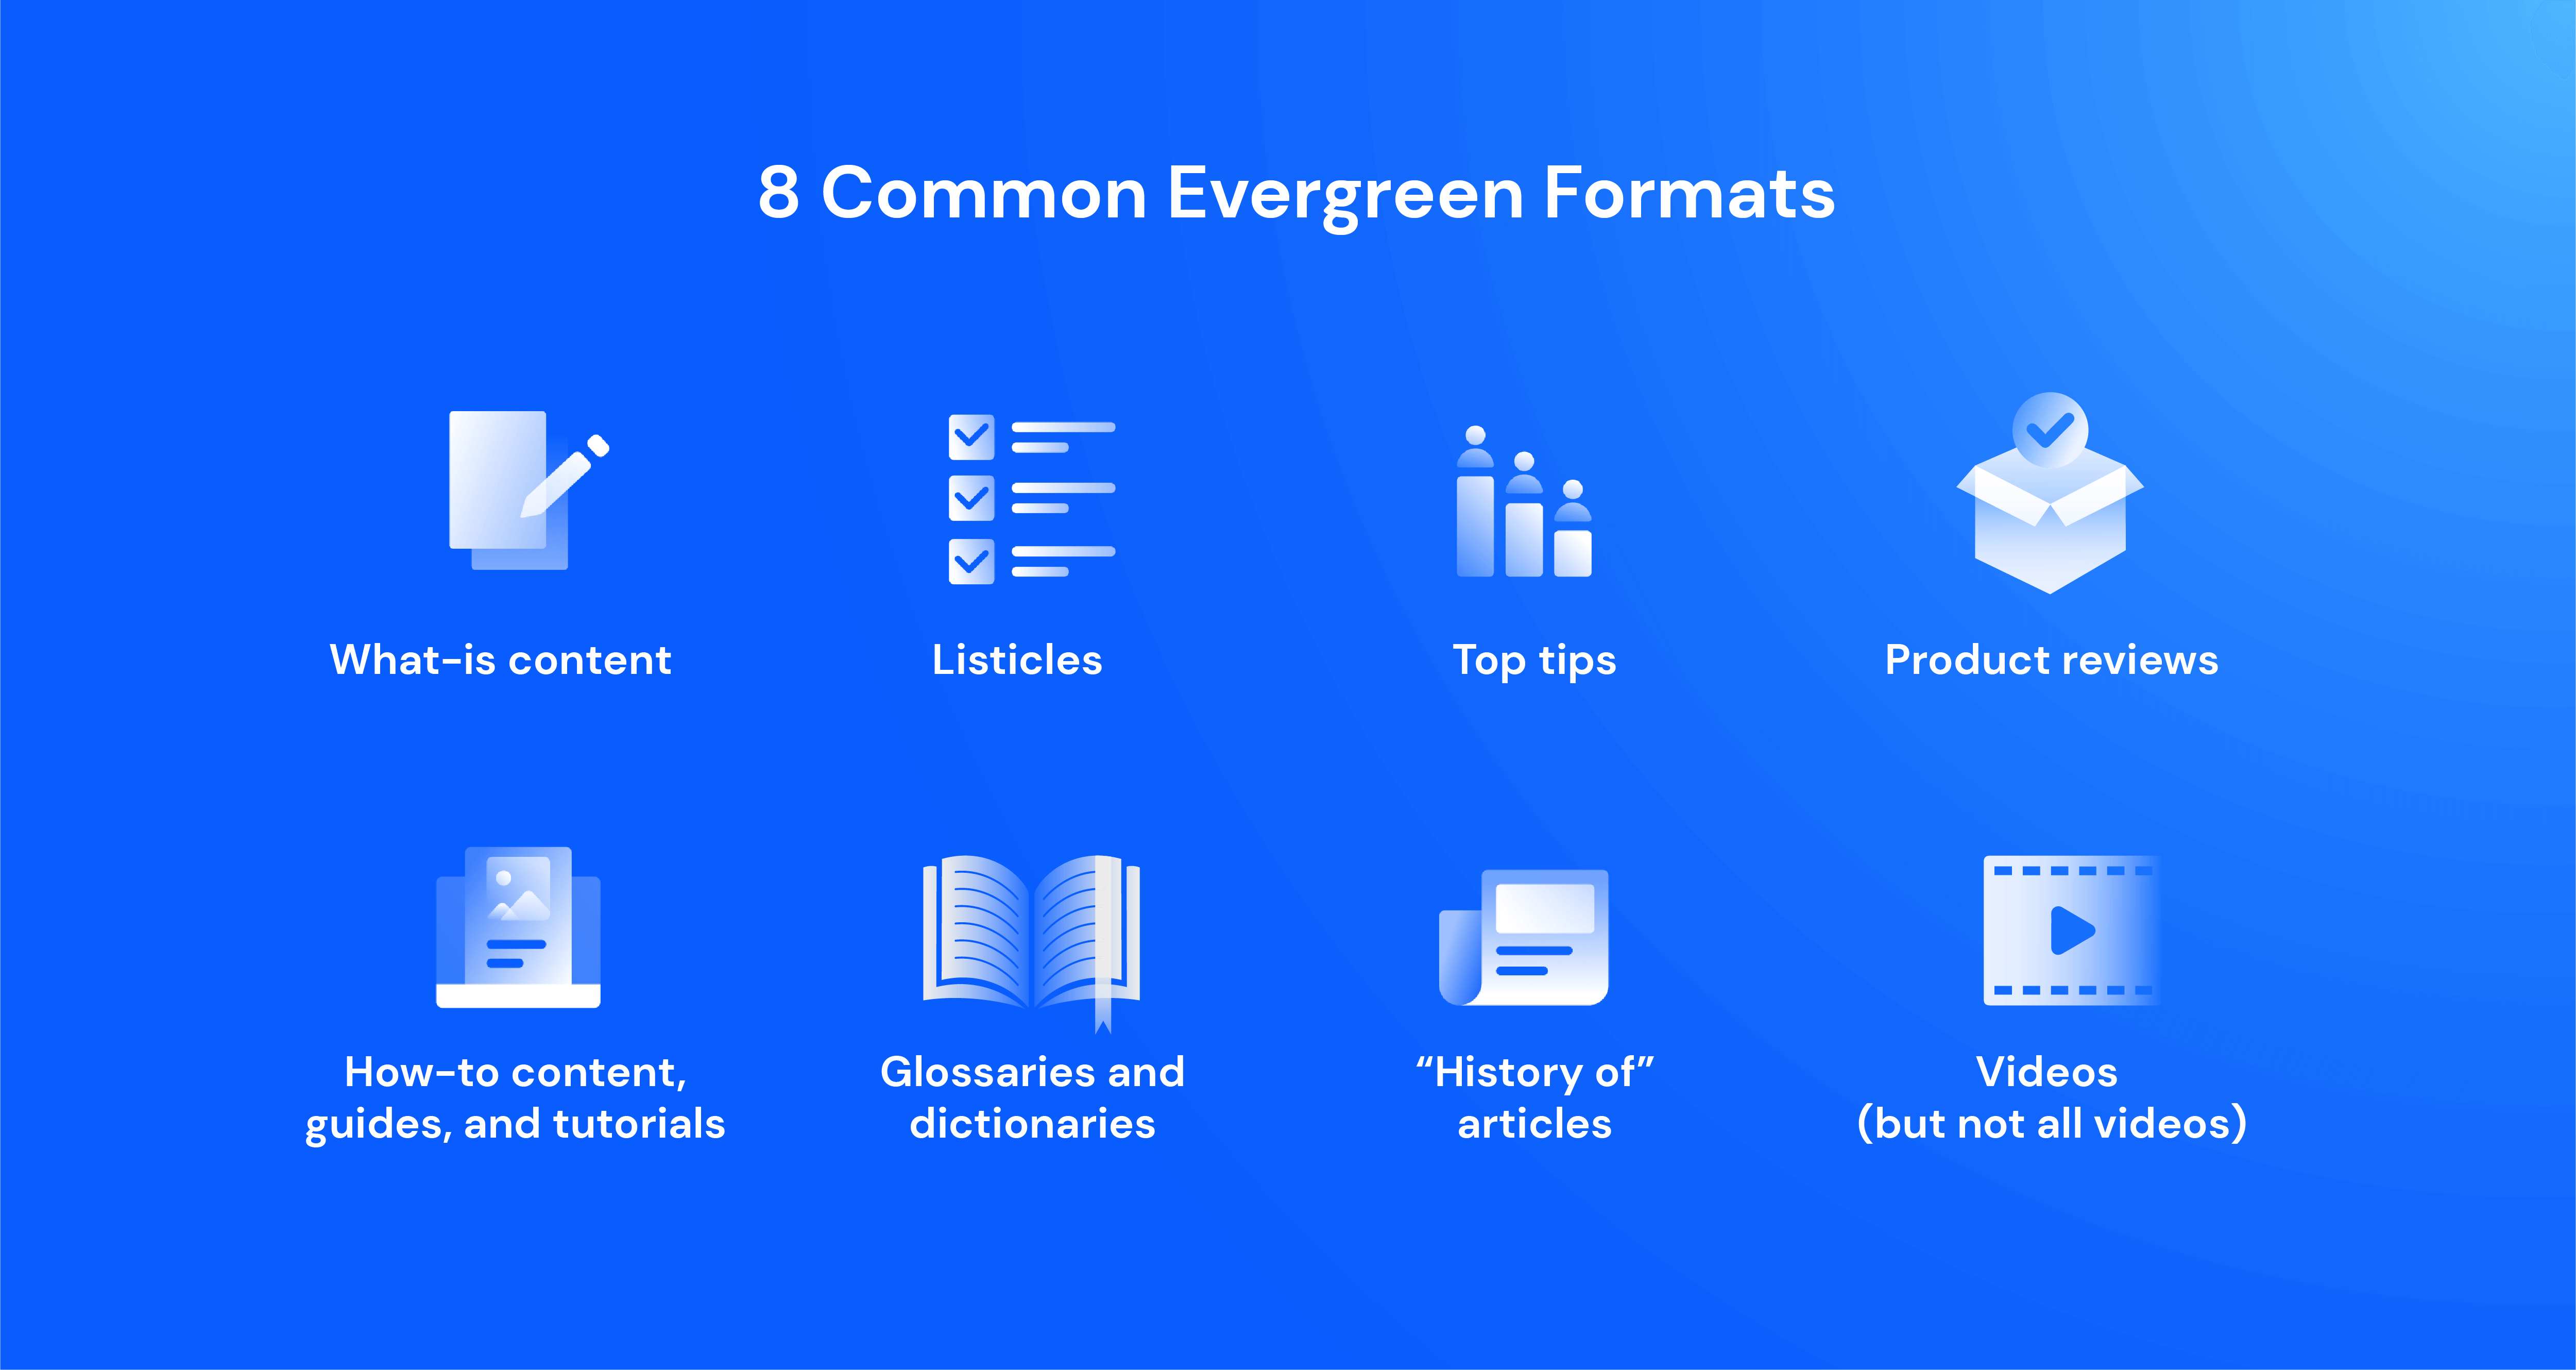 8 Common Evergreen formats image with icons